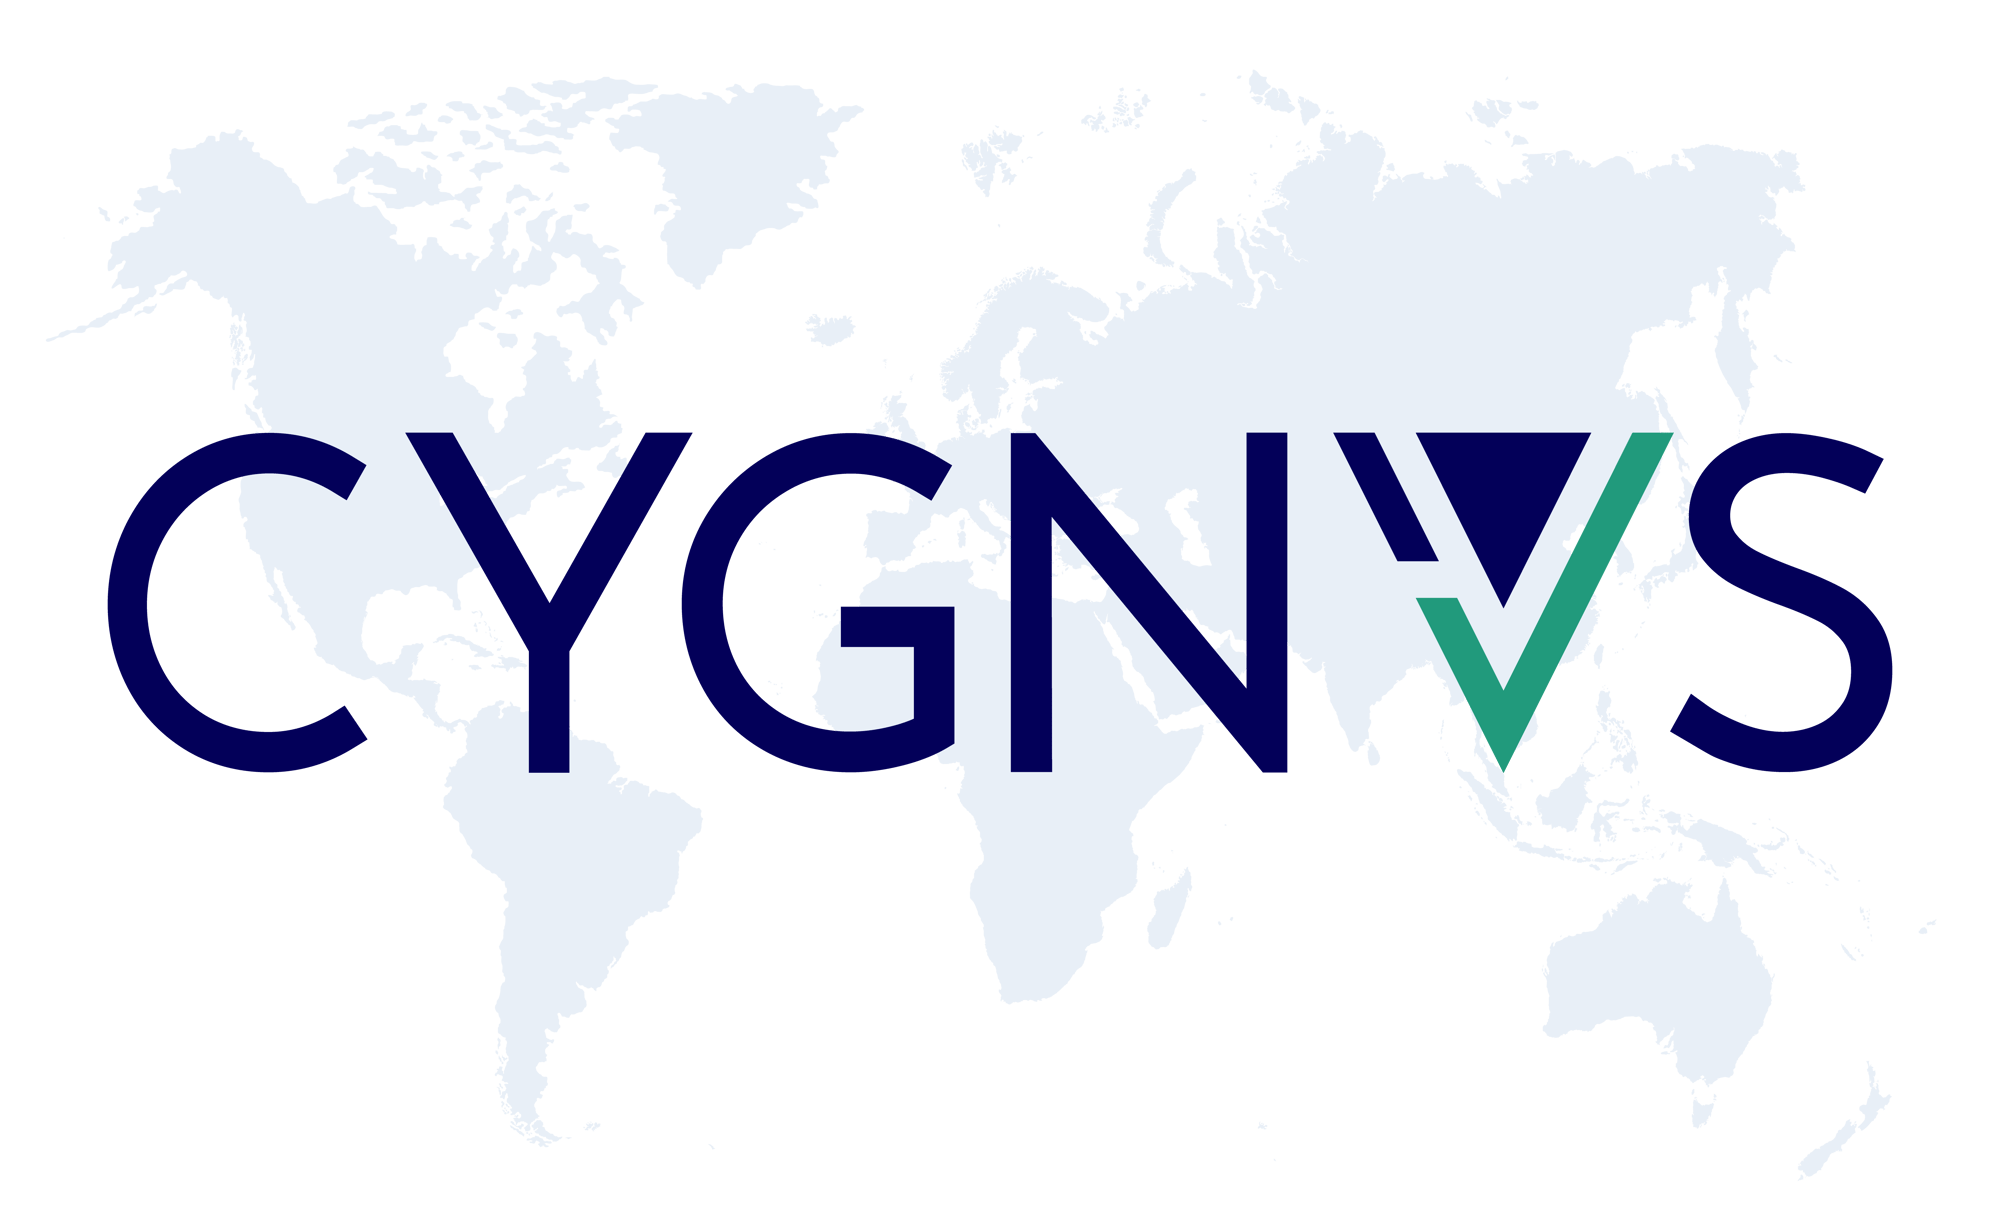 CYG_Web_About_Map with Logo-1